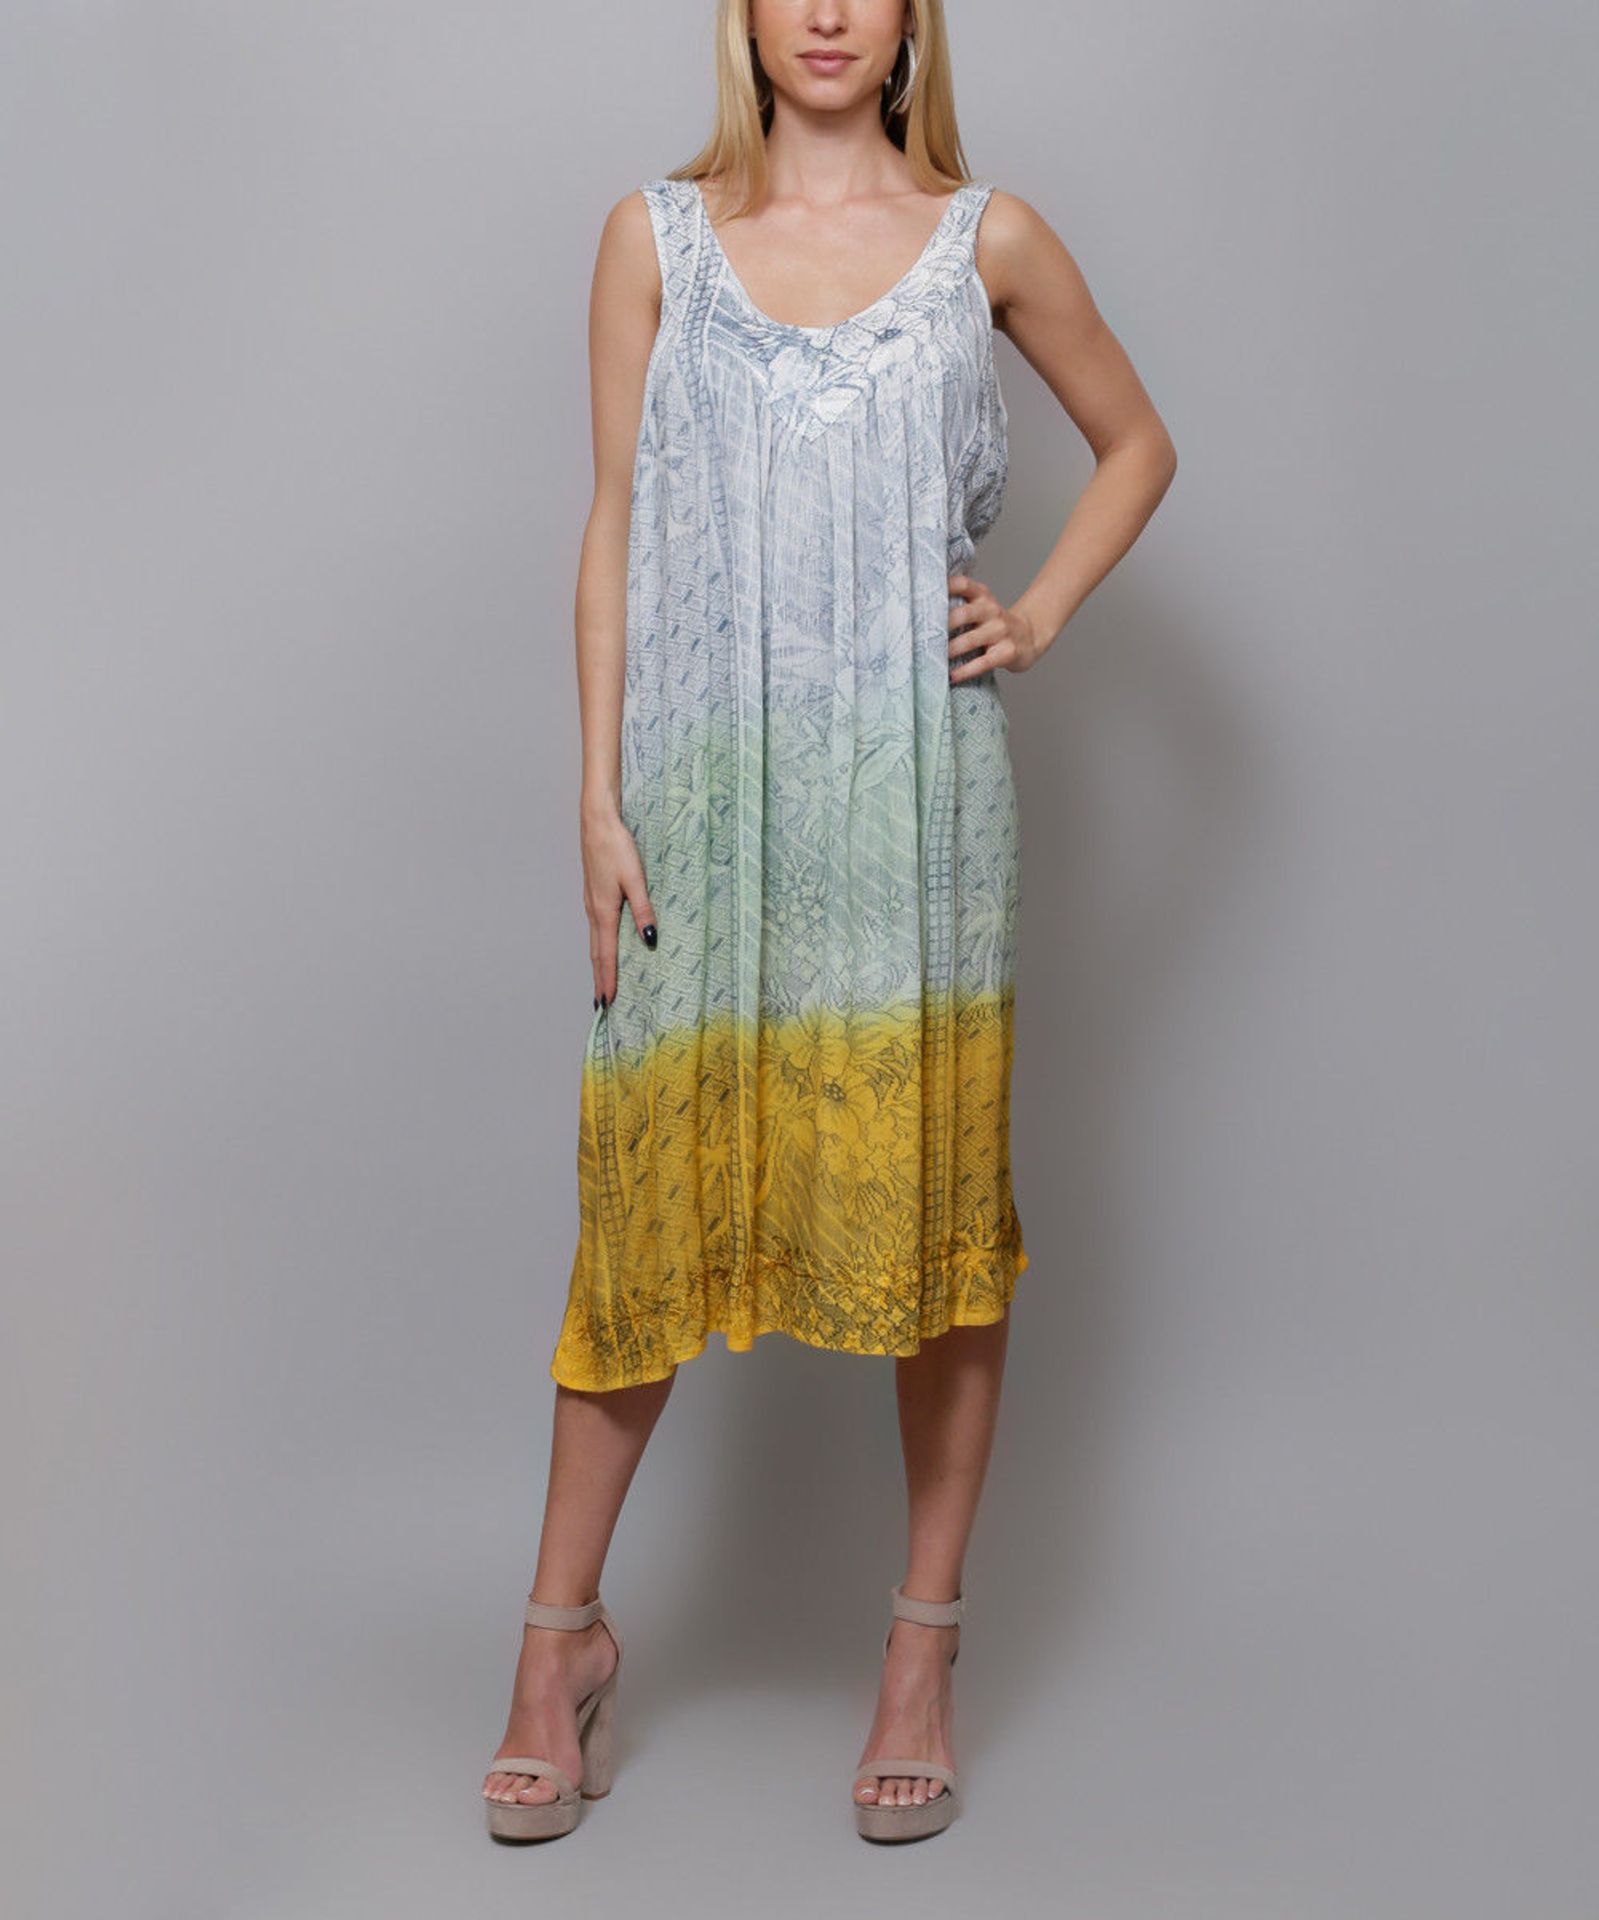 Highness NYC Yellow & Mint Embroidered Sleeveless Swing Dress (One Size) (New with tags) [Ref: